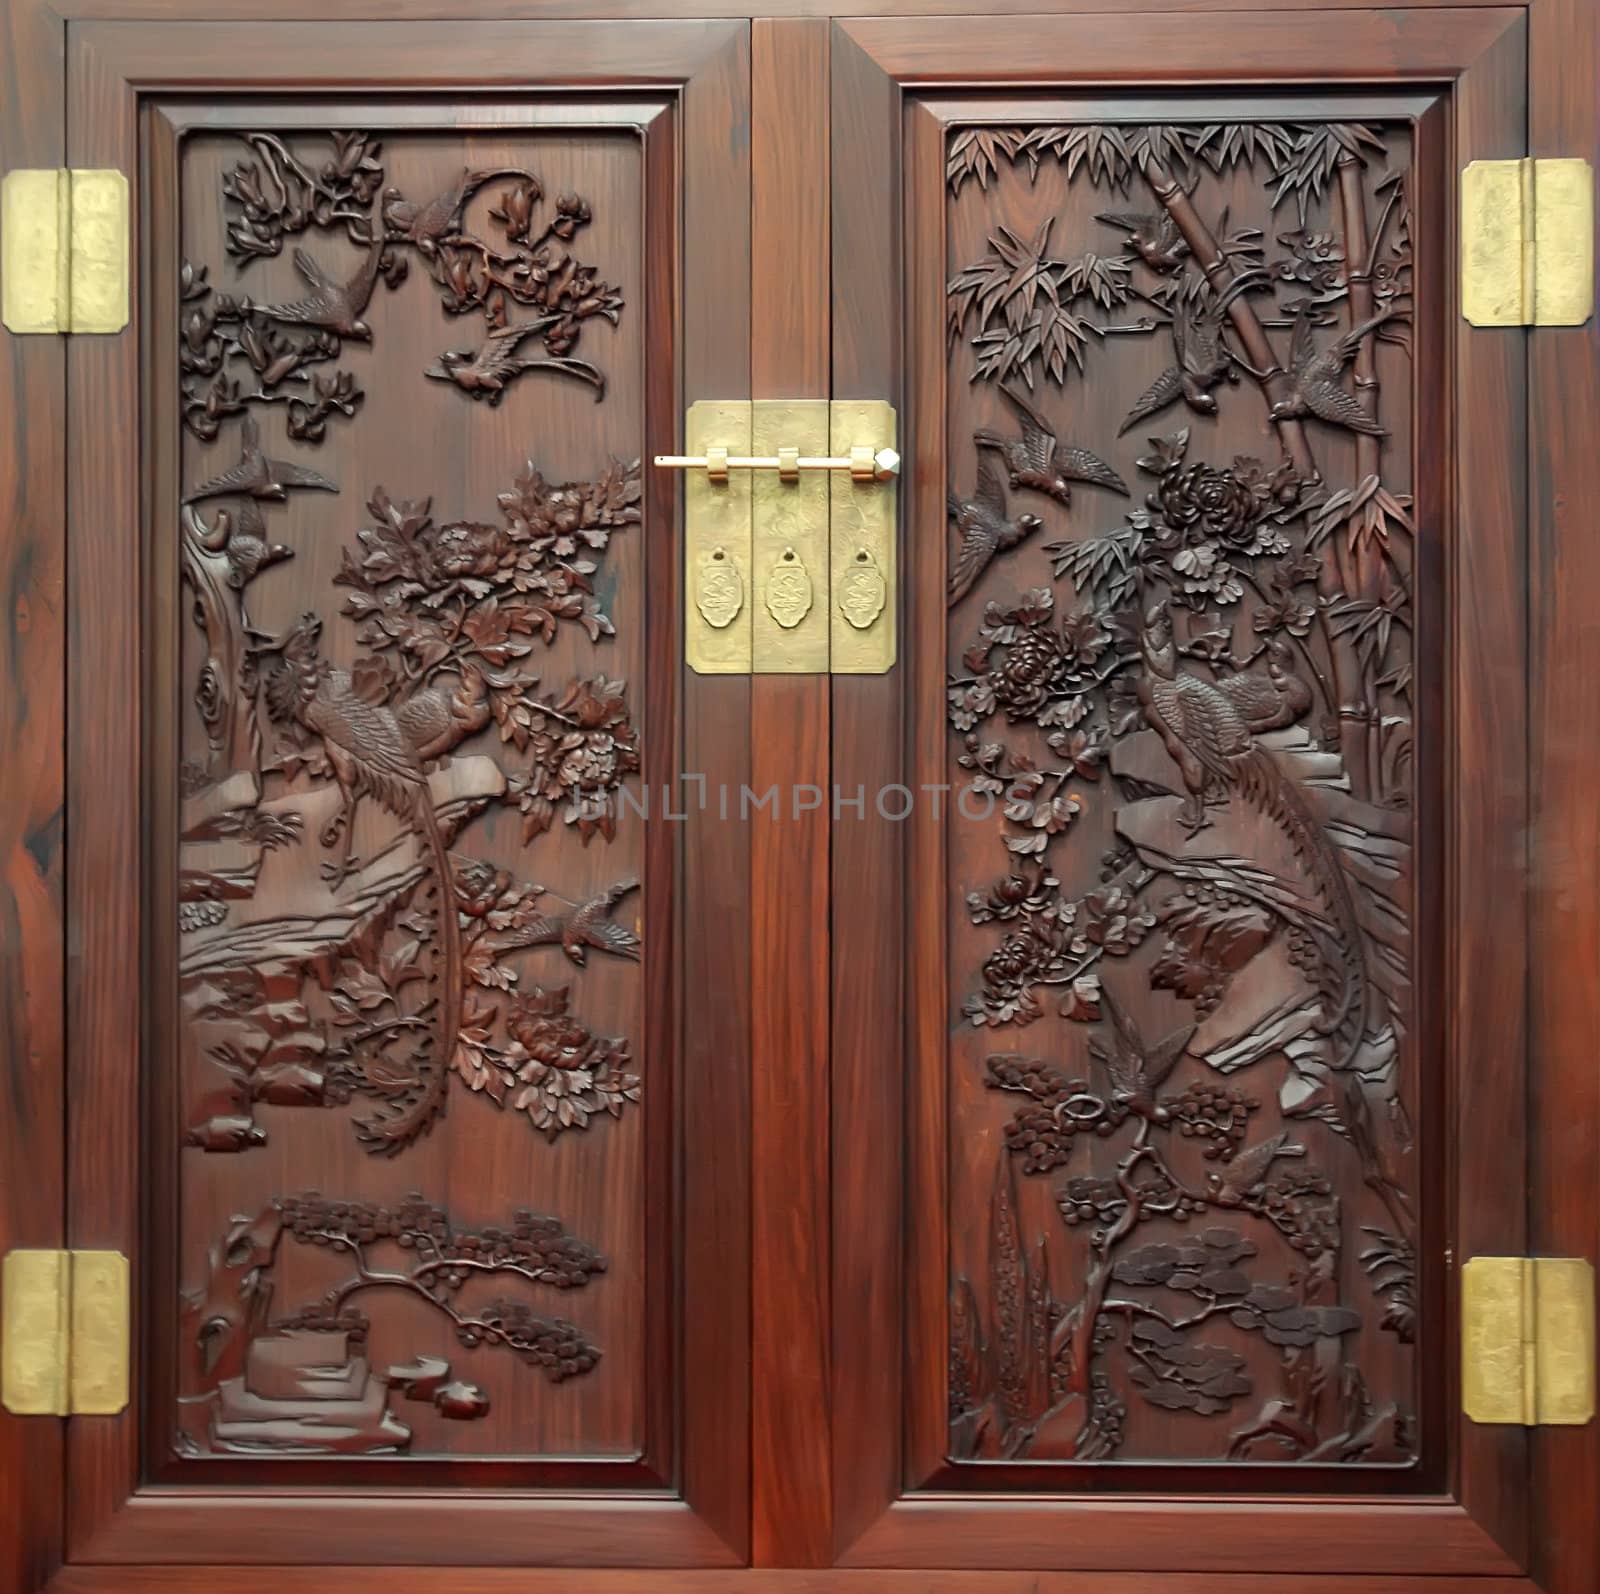 Imitation of ancient Chinese-style wooden furniture by xfdly5